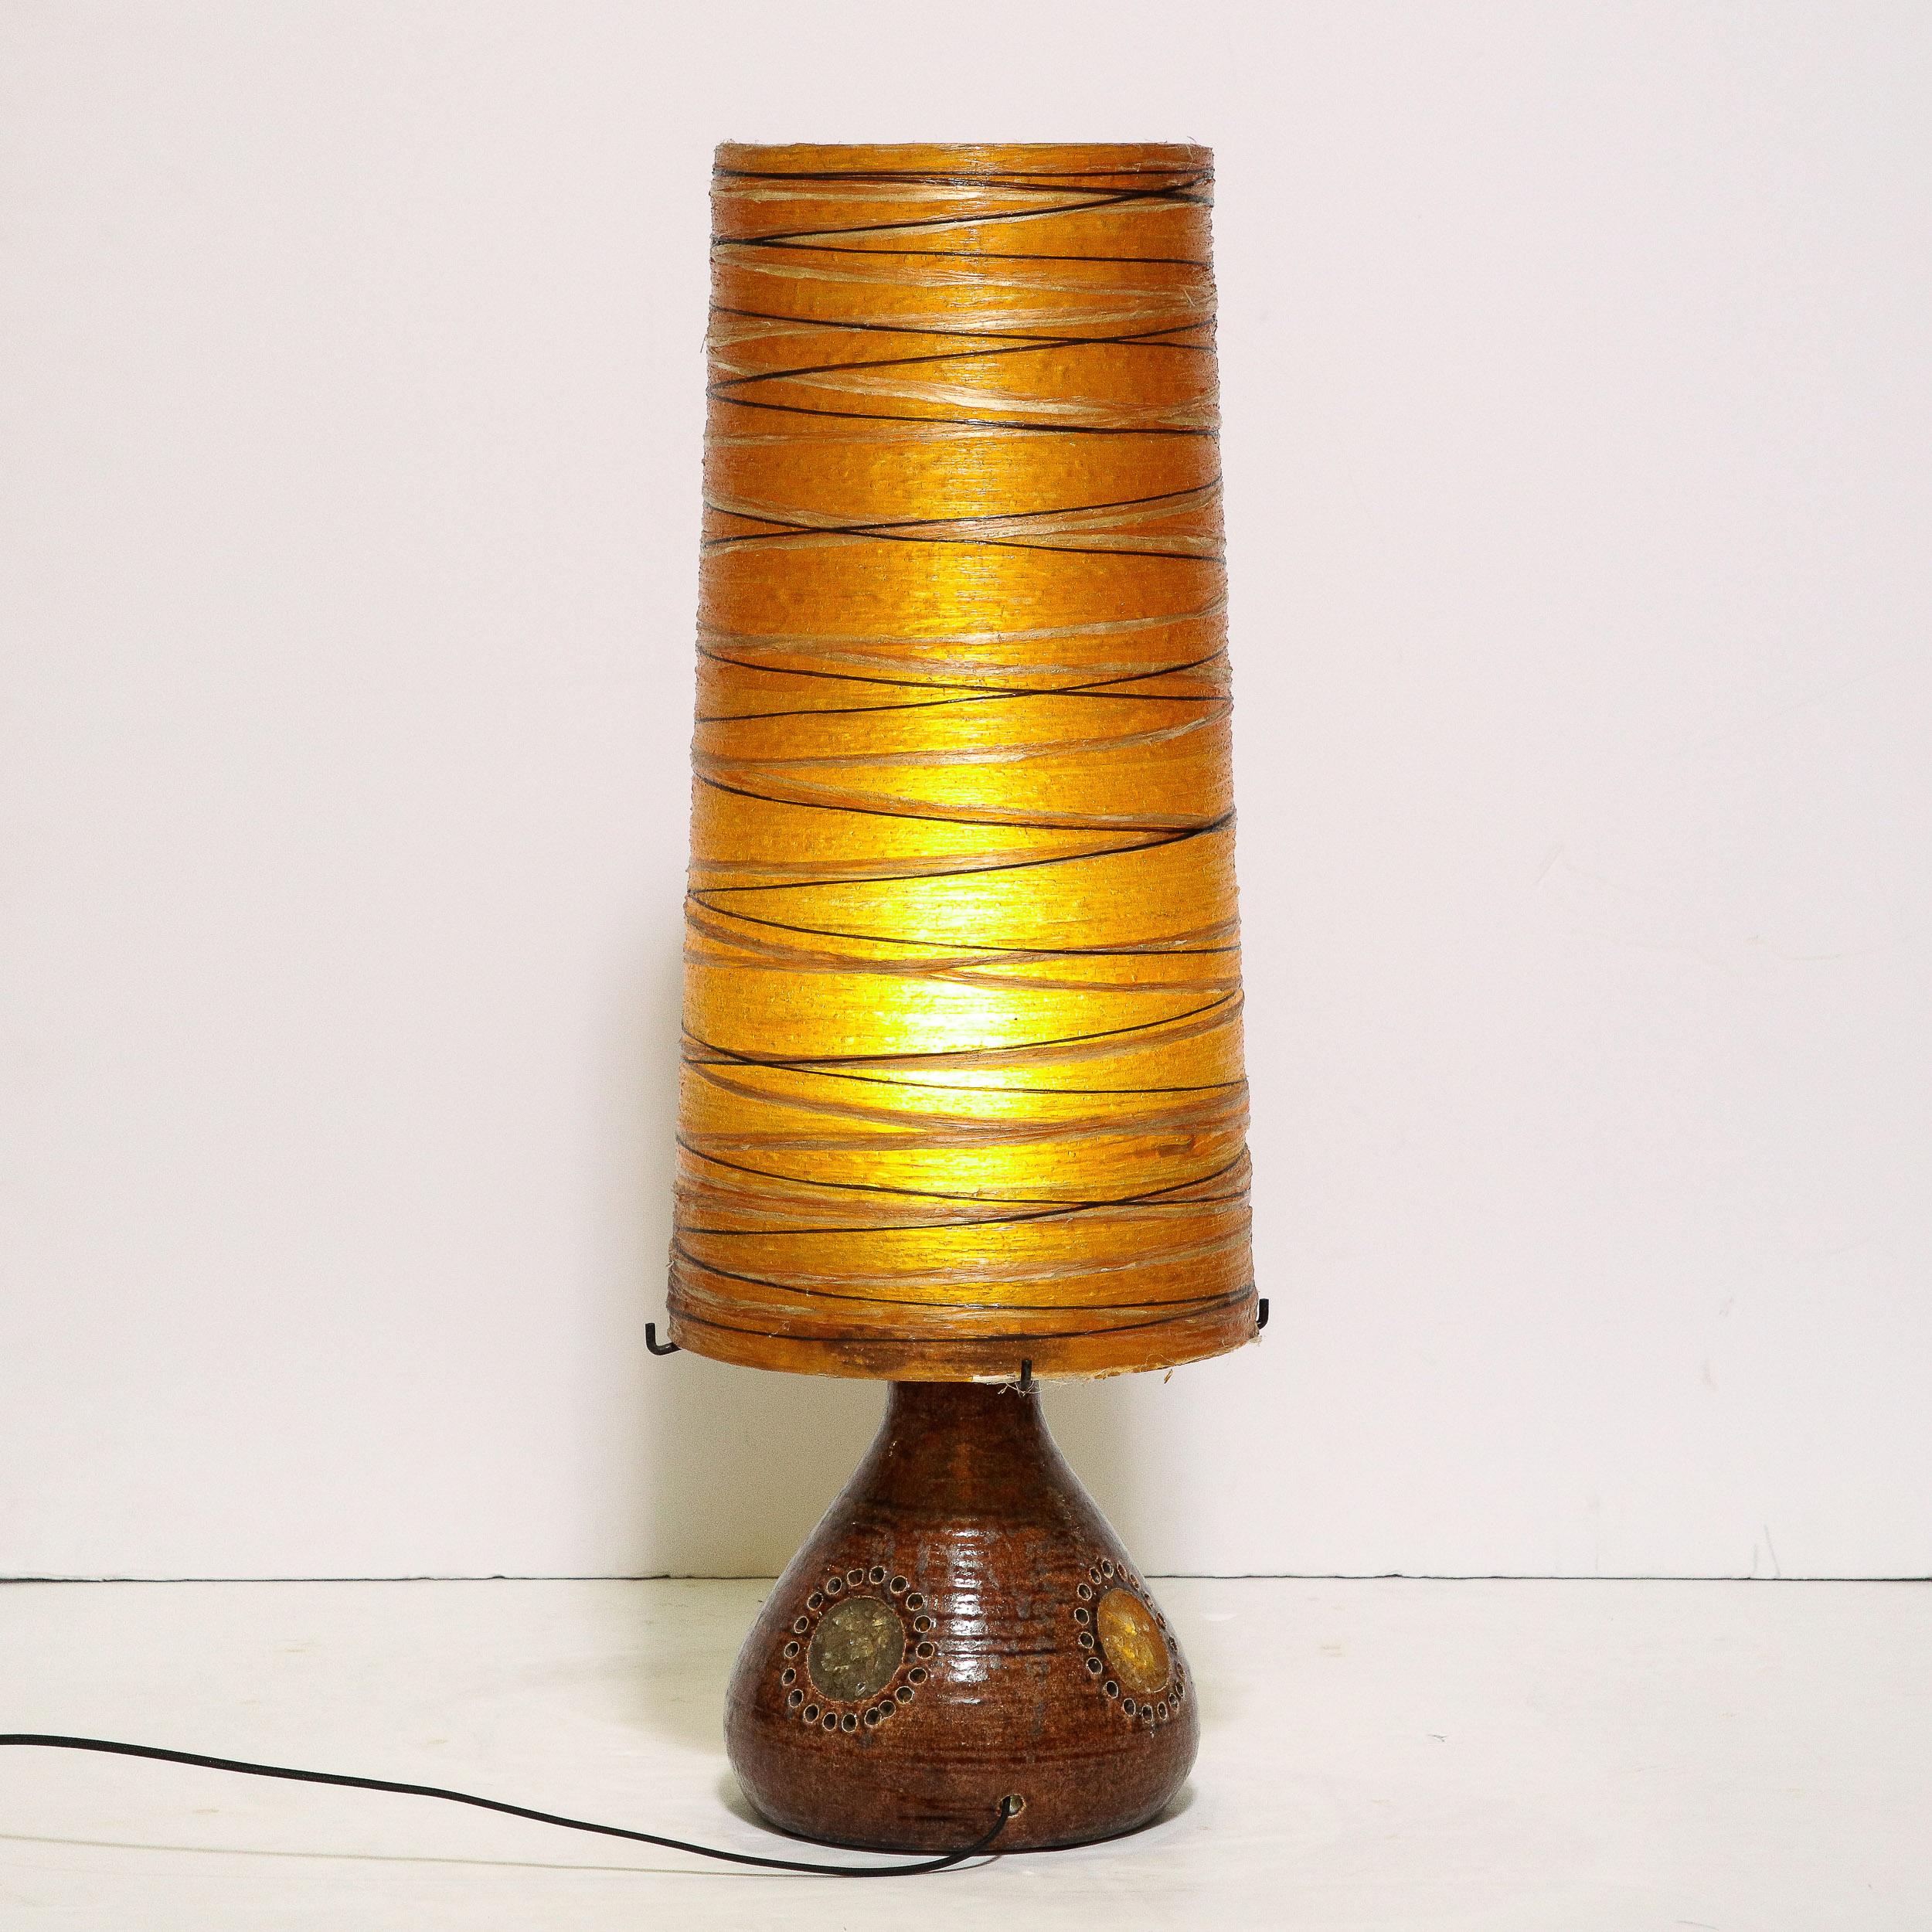 Midcentury Brutalist Ceramic Table Lamp with Horizontally Striated Resin Shade For Sale 4